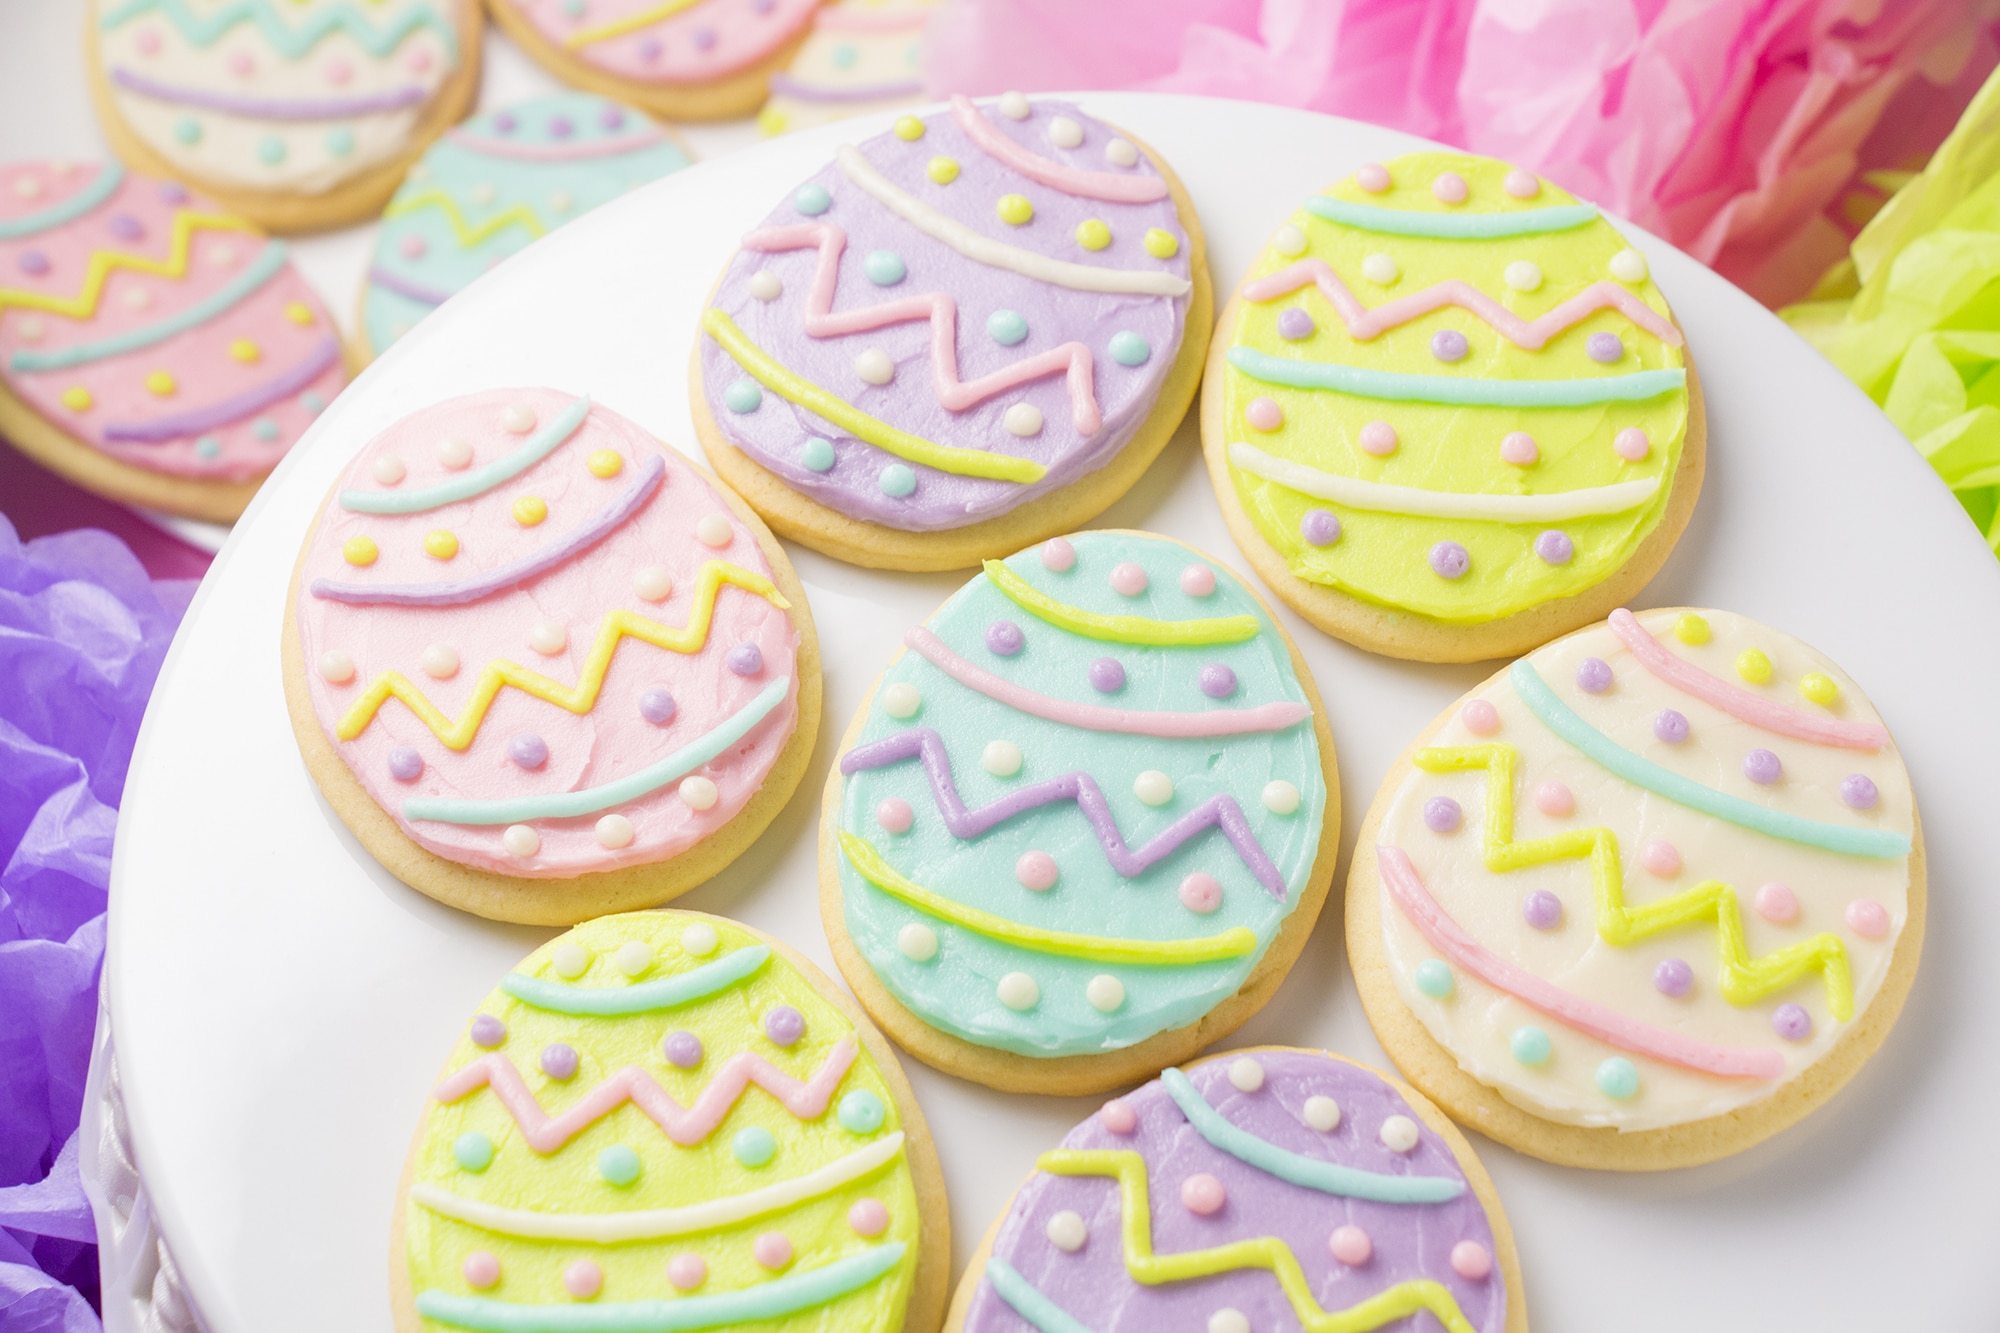 aEaster Egg Sugar Cookies topped with Buttercream Frosting